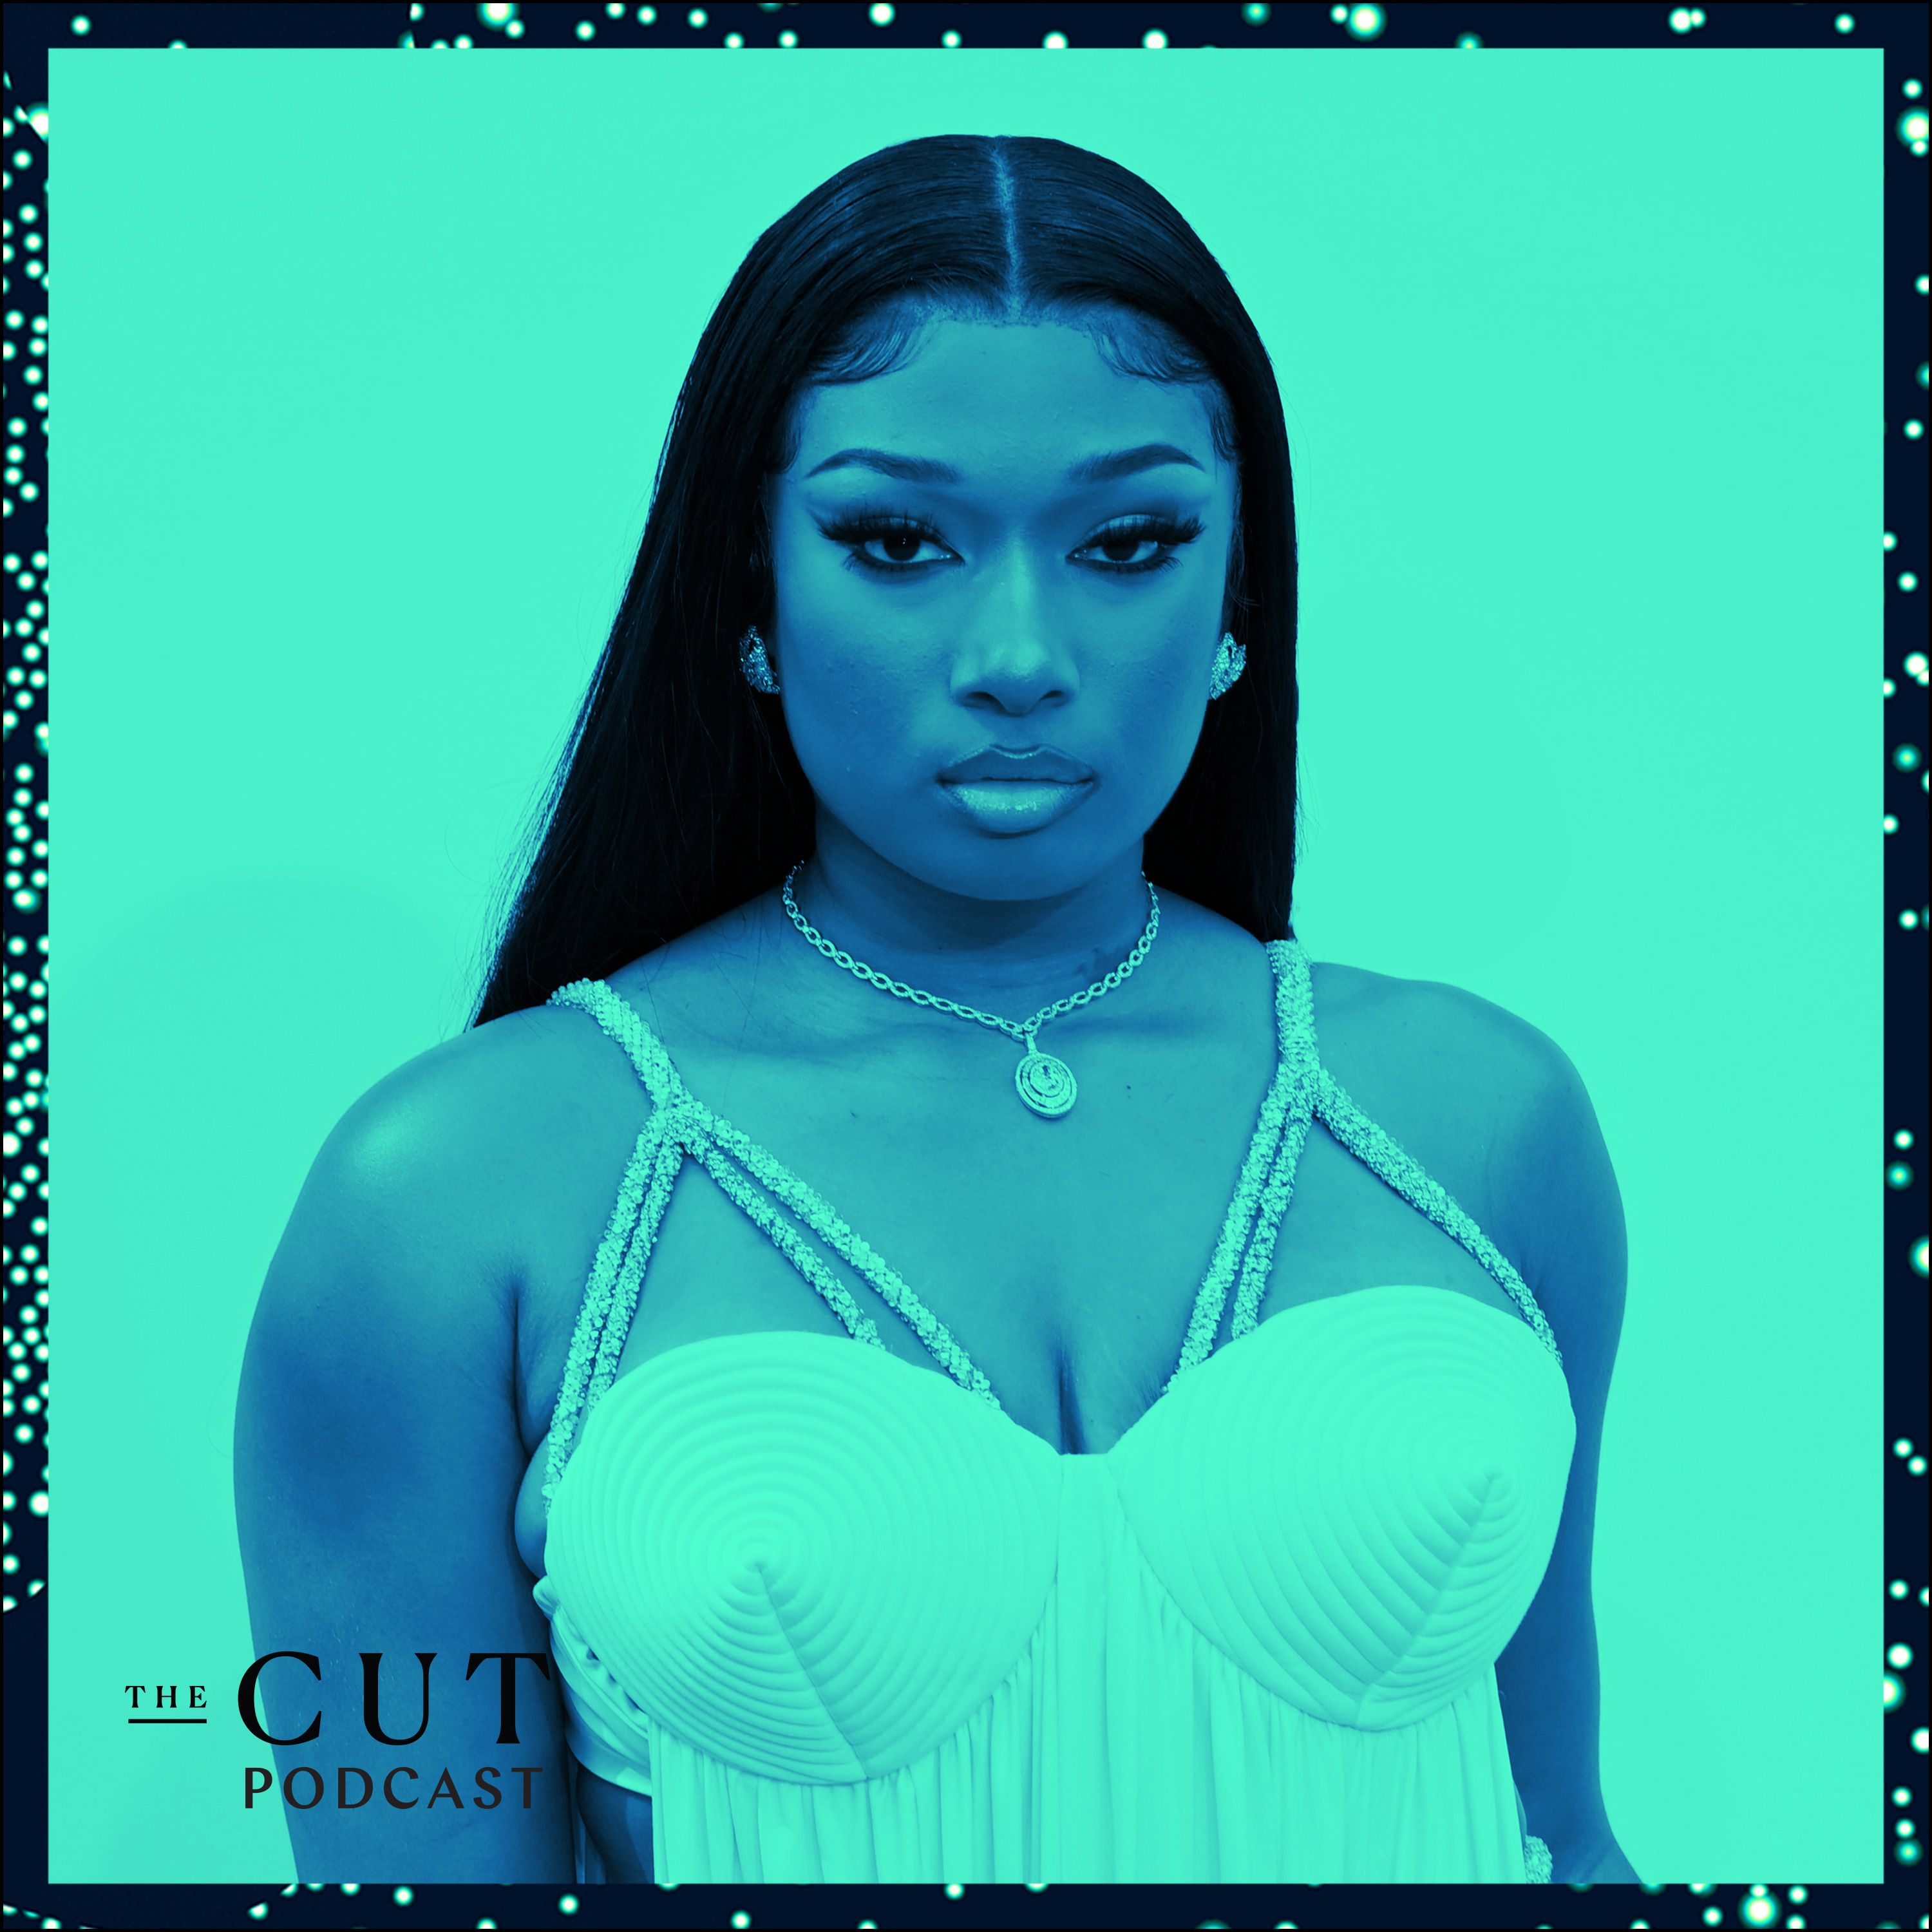 School Giral Fuking Com - The Cut Podcast: Why Does the Internet Hate Black Women?